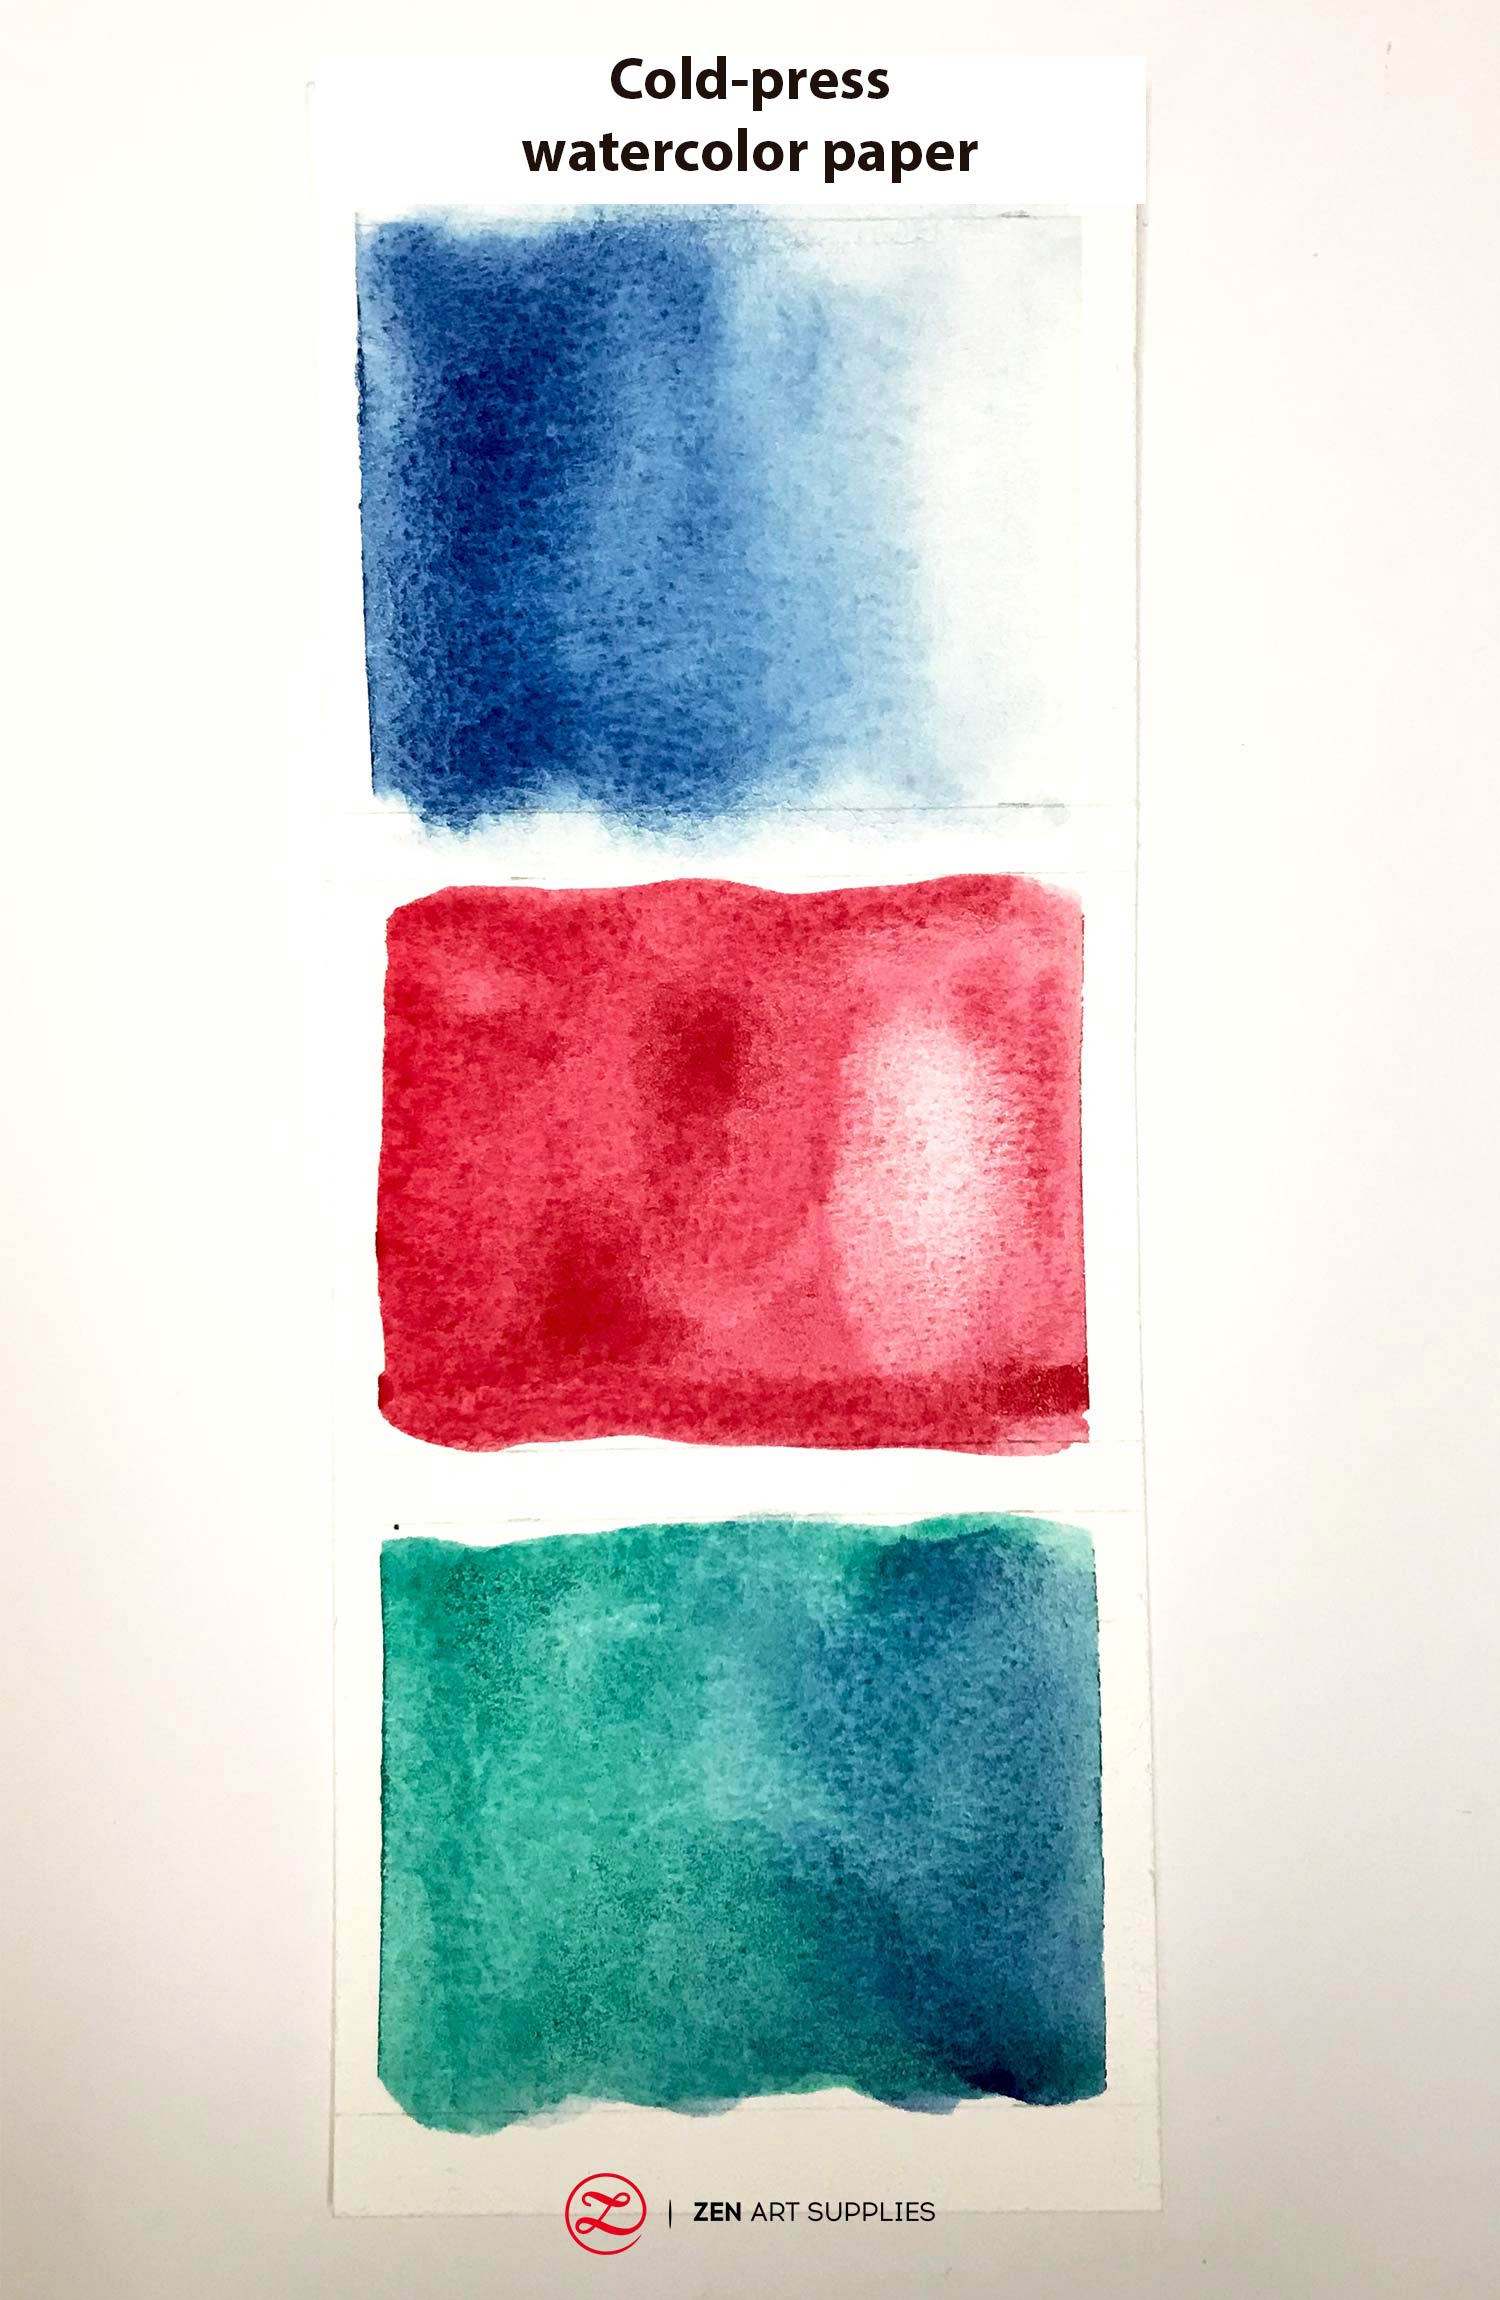 How to stretch watercolor paper - make your own canvas